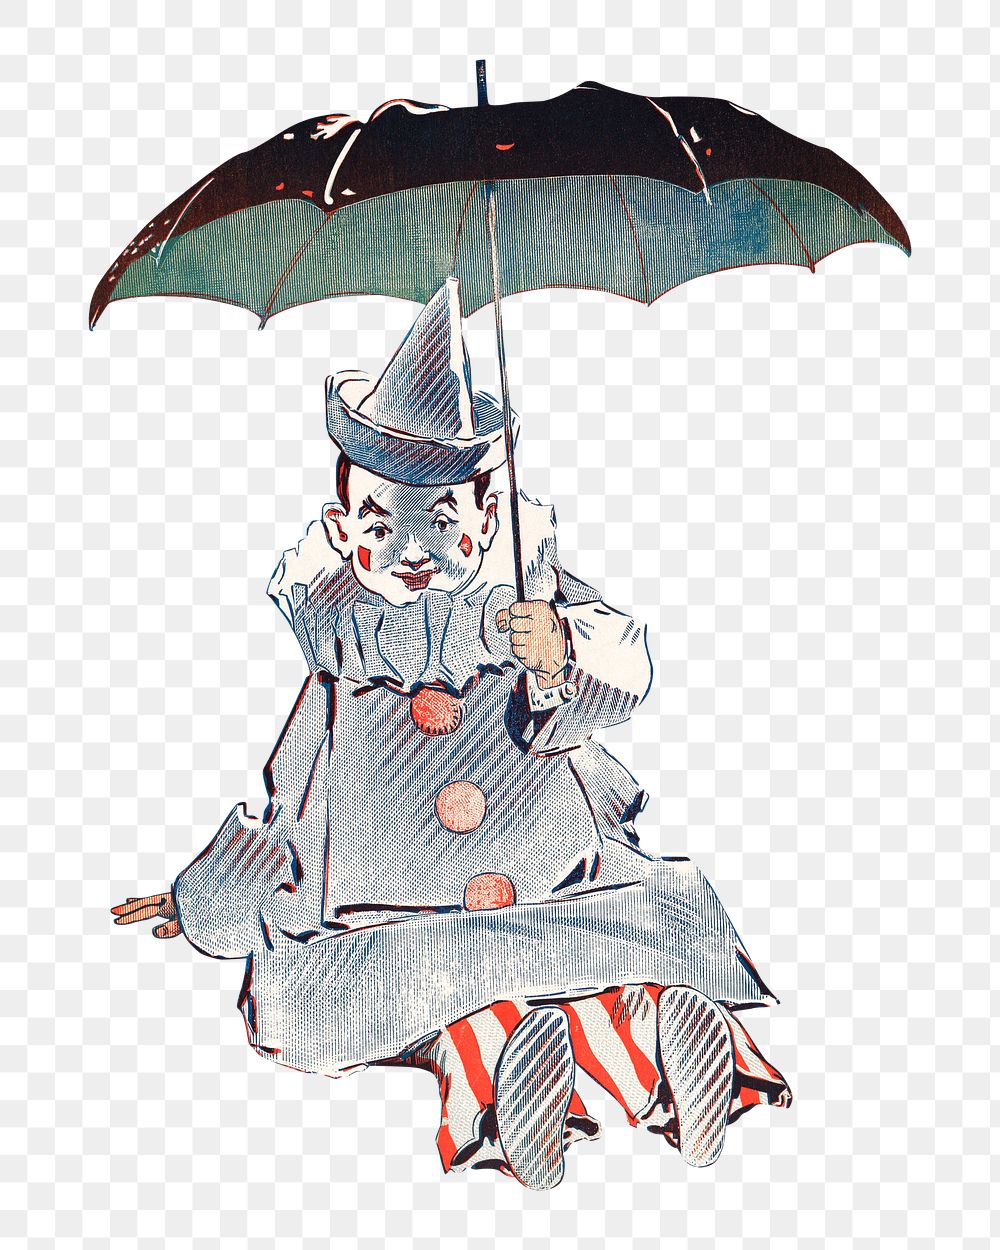 PNG Clown holding umbrella, vintage illustration by George Reiter Brill, transparent background.  Remixed by rawpixel. 